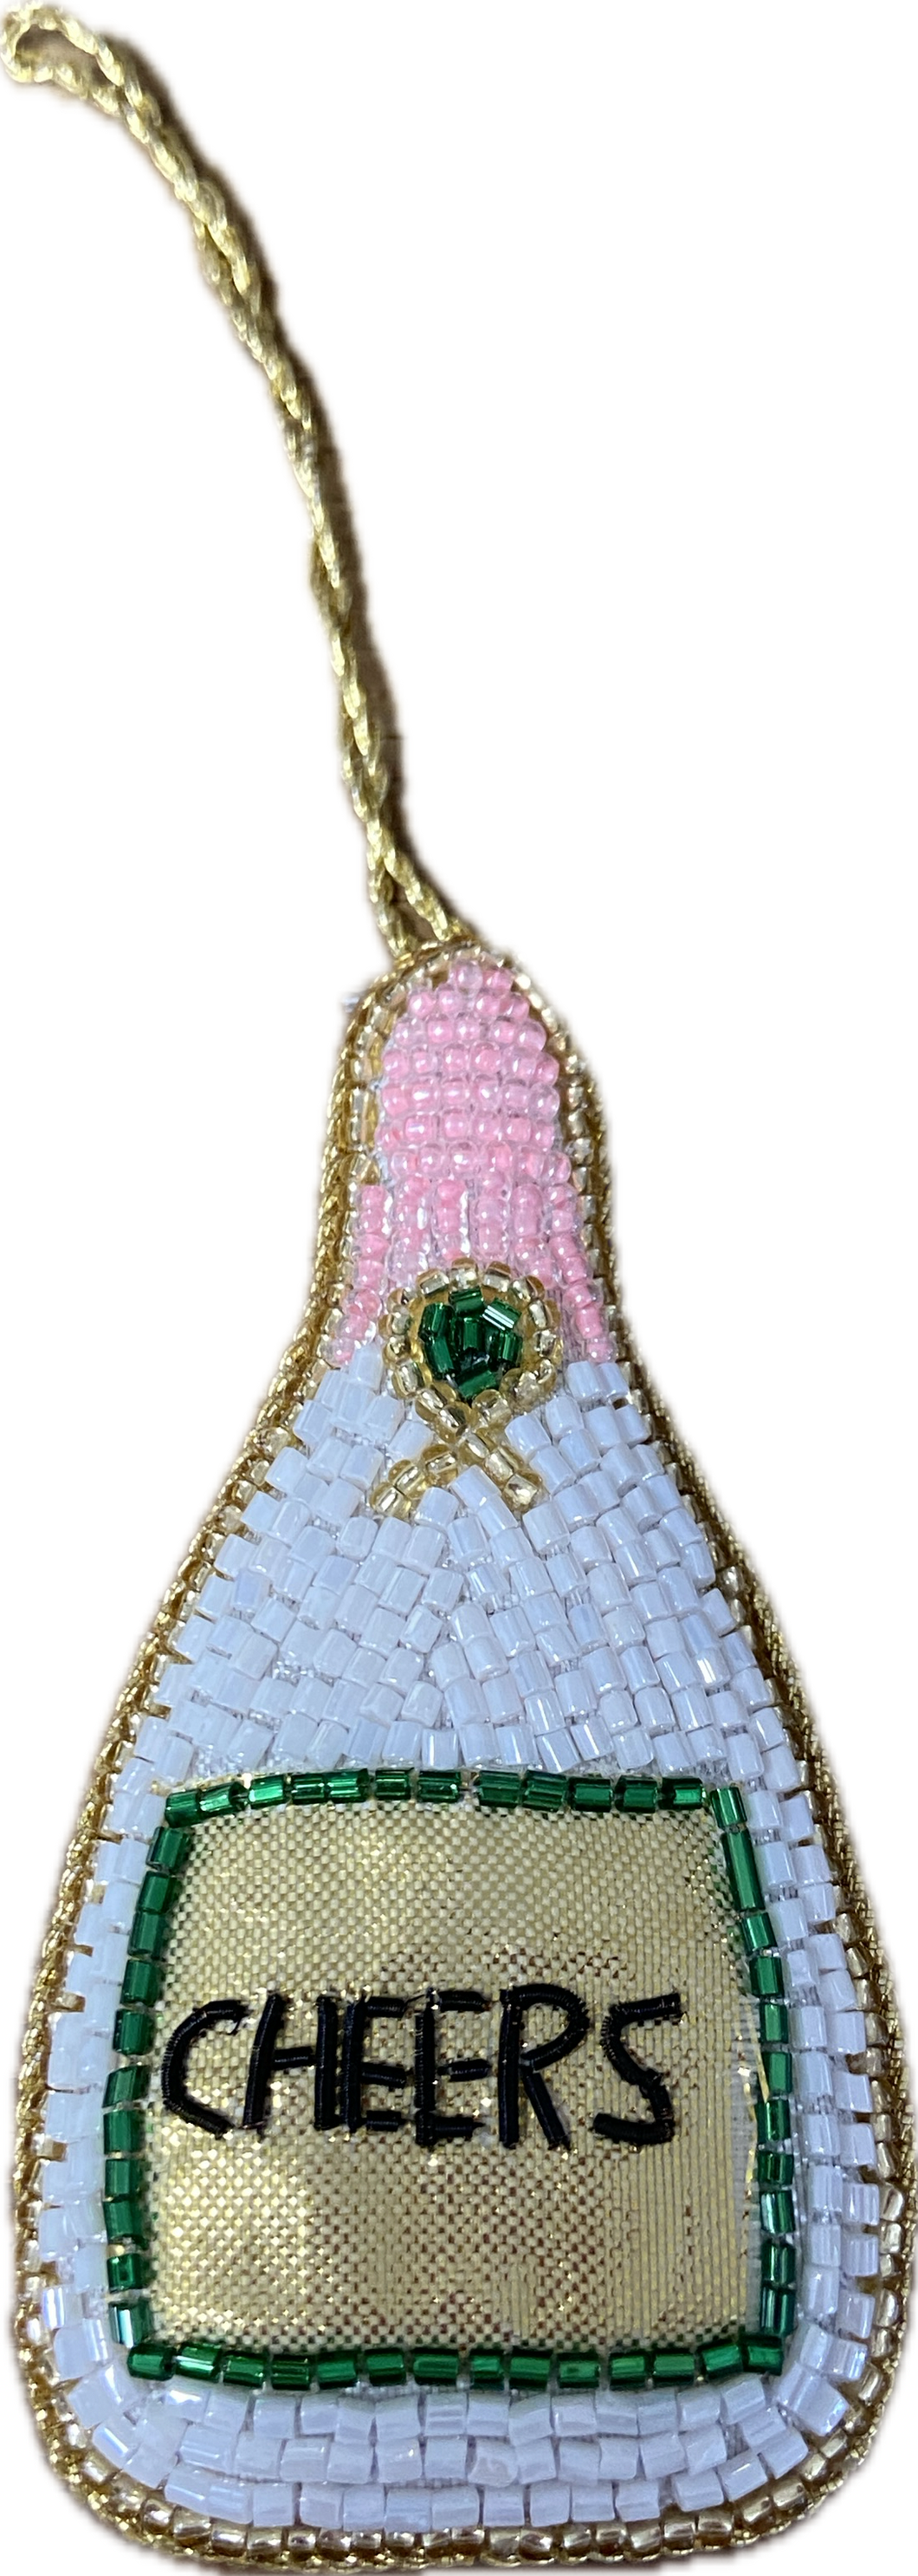 Beaded Cheers Ornament